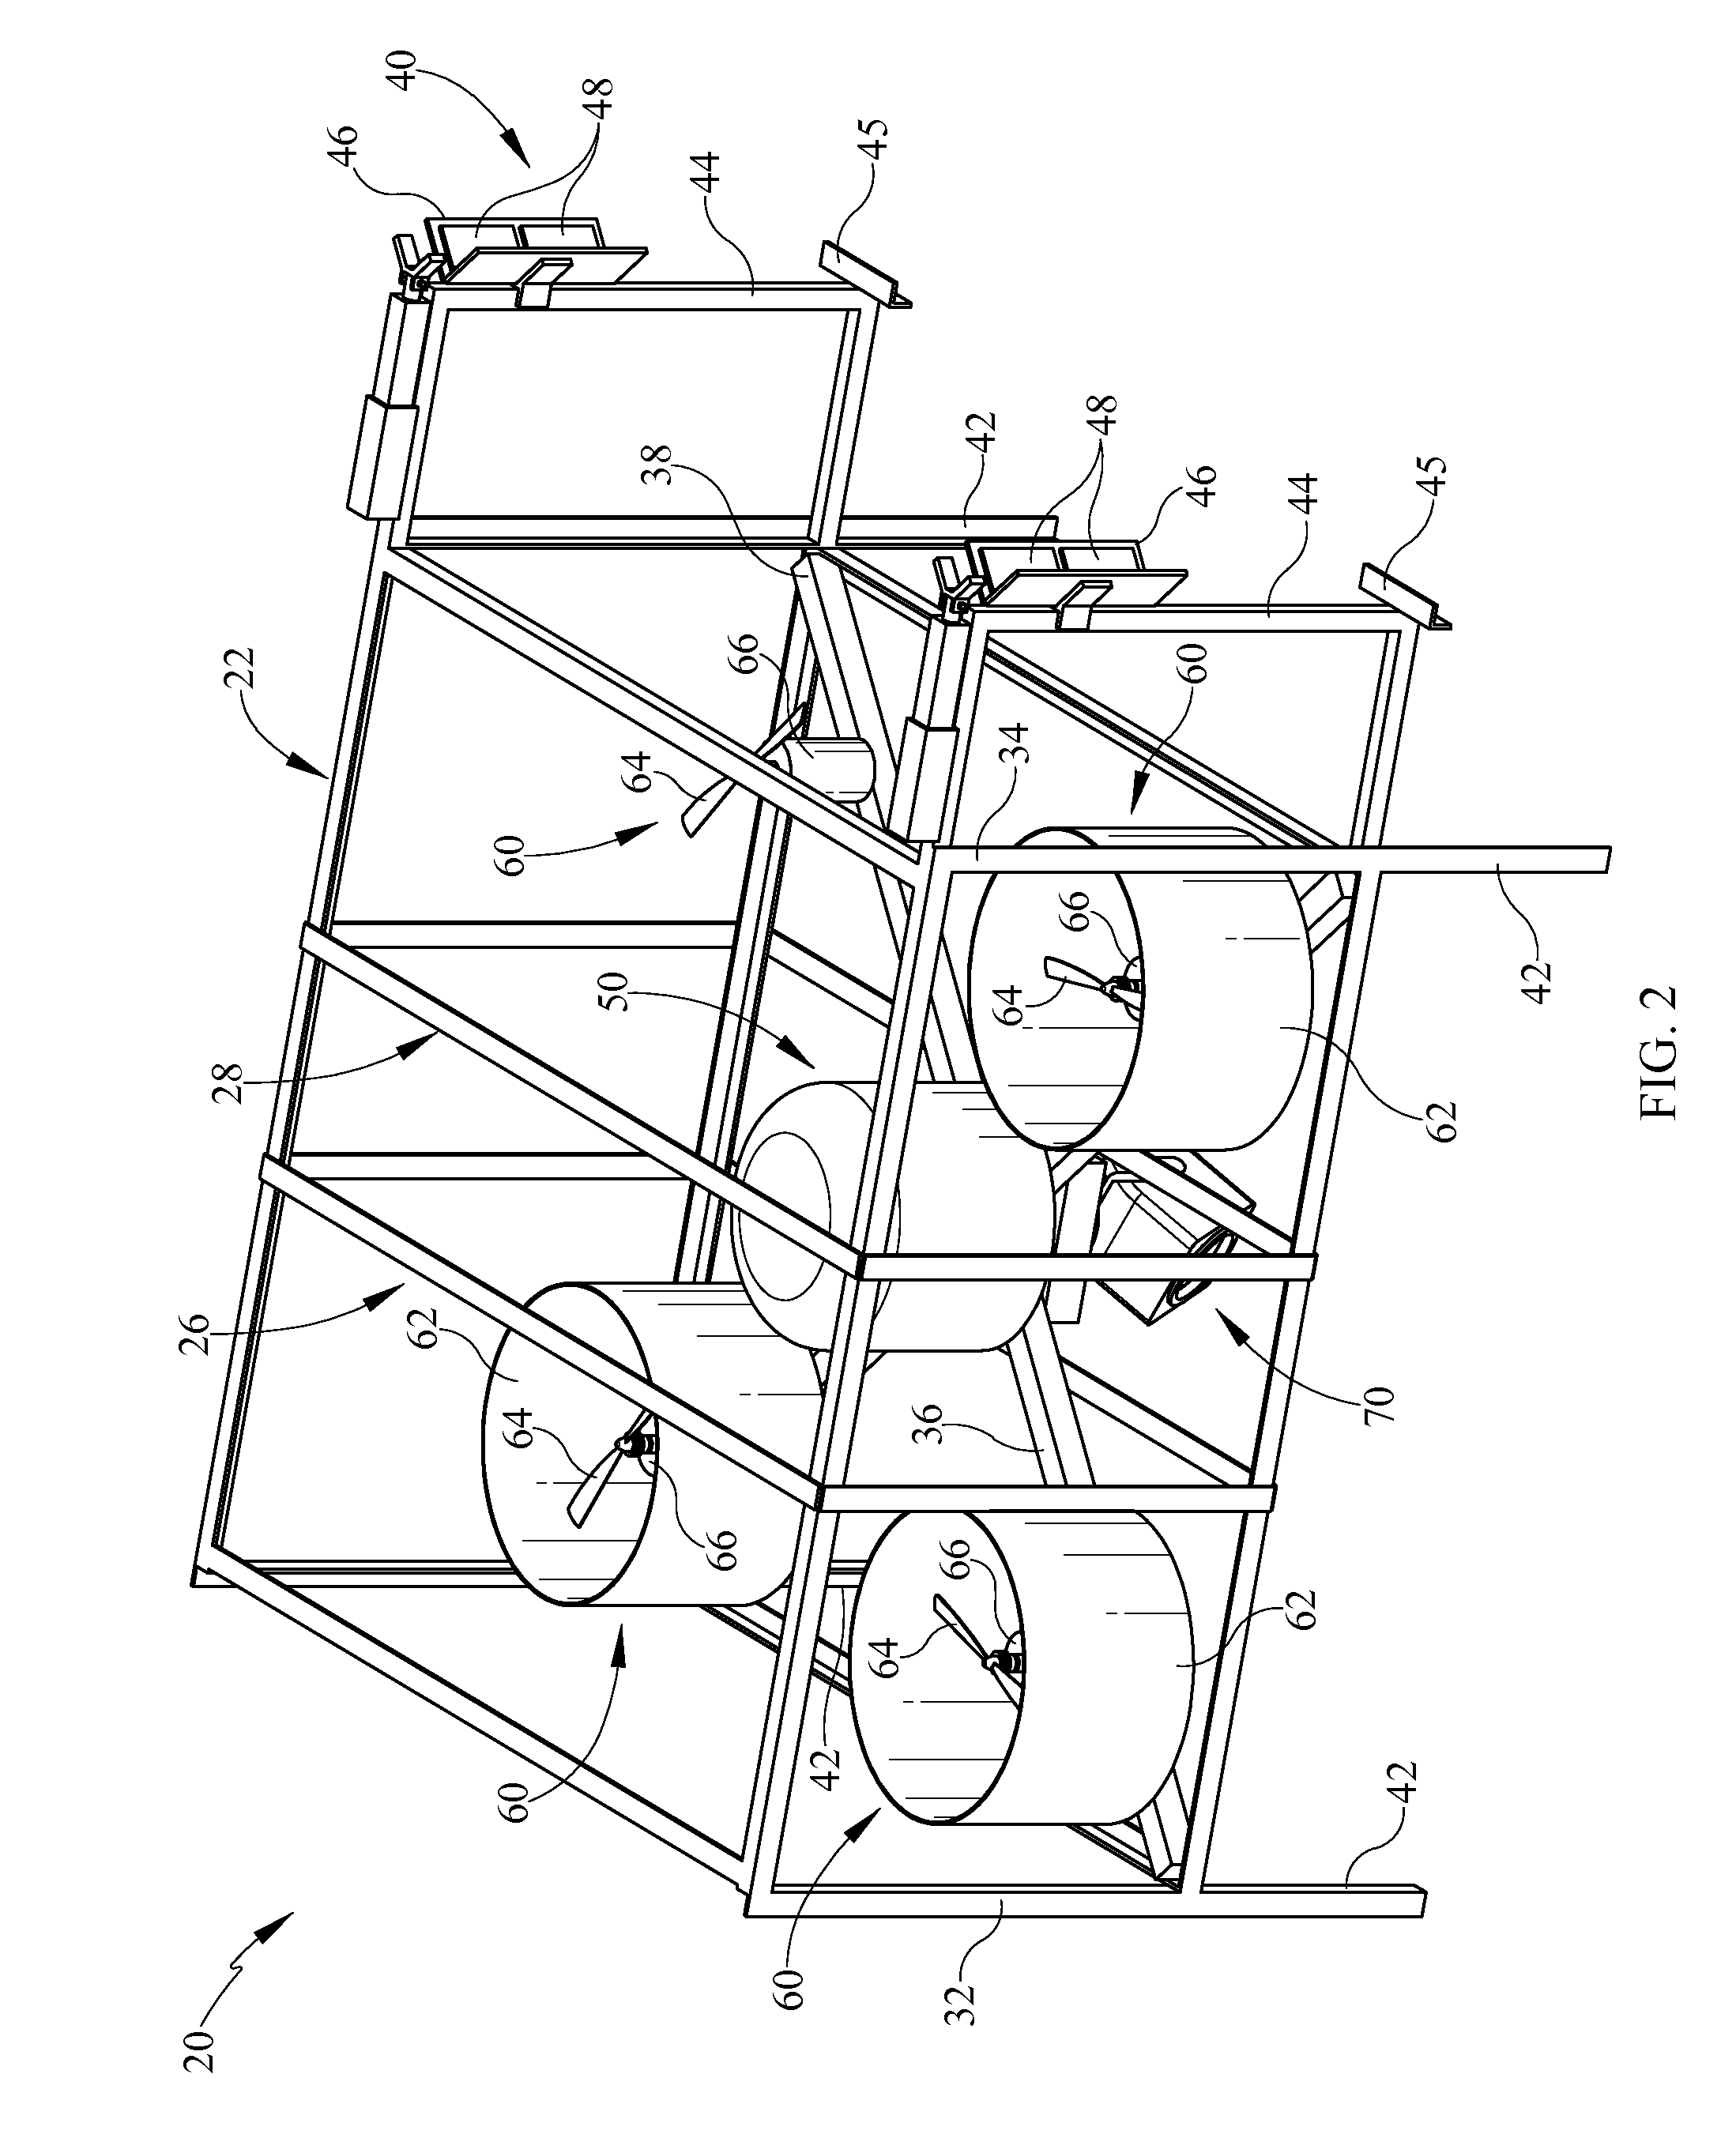 Drone for inspection of enclosed space and method thereof